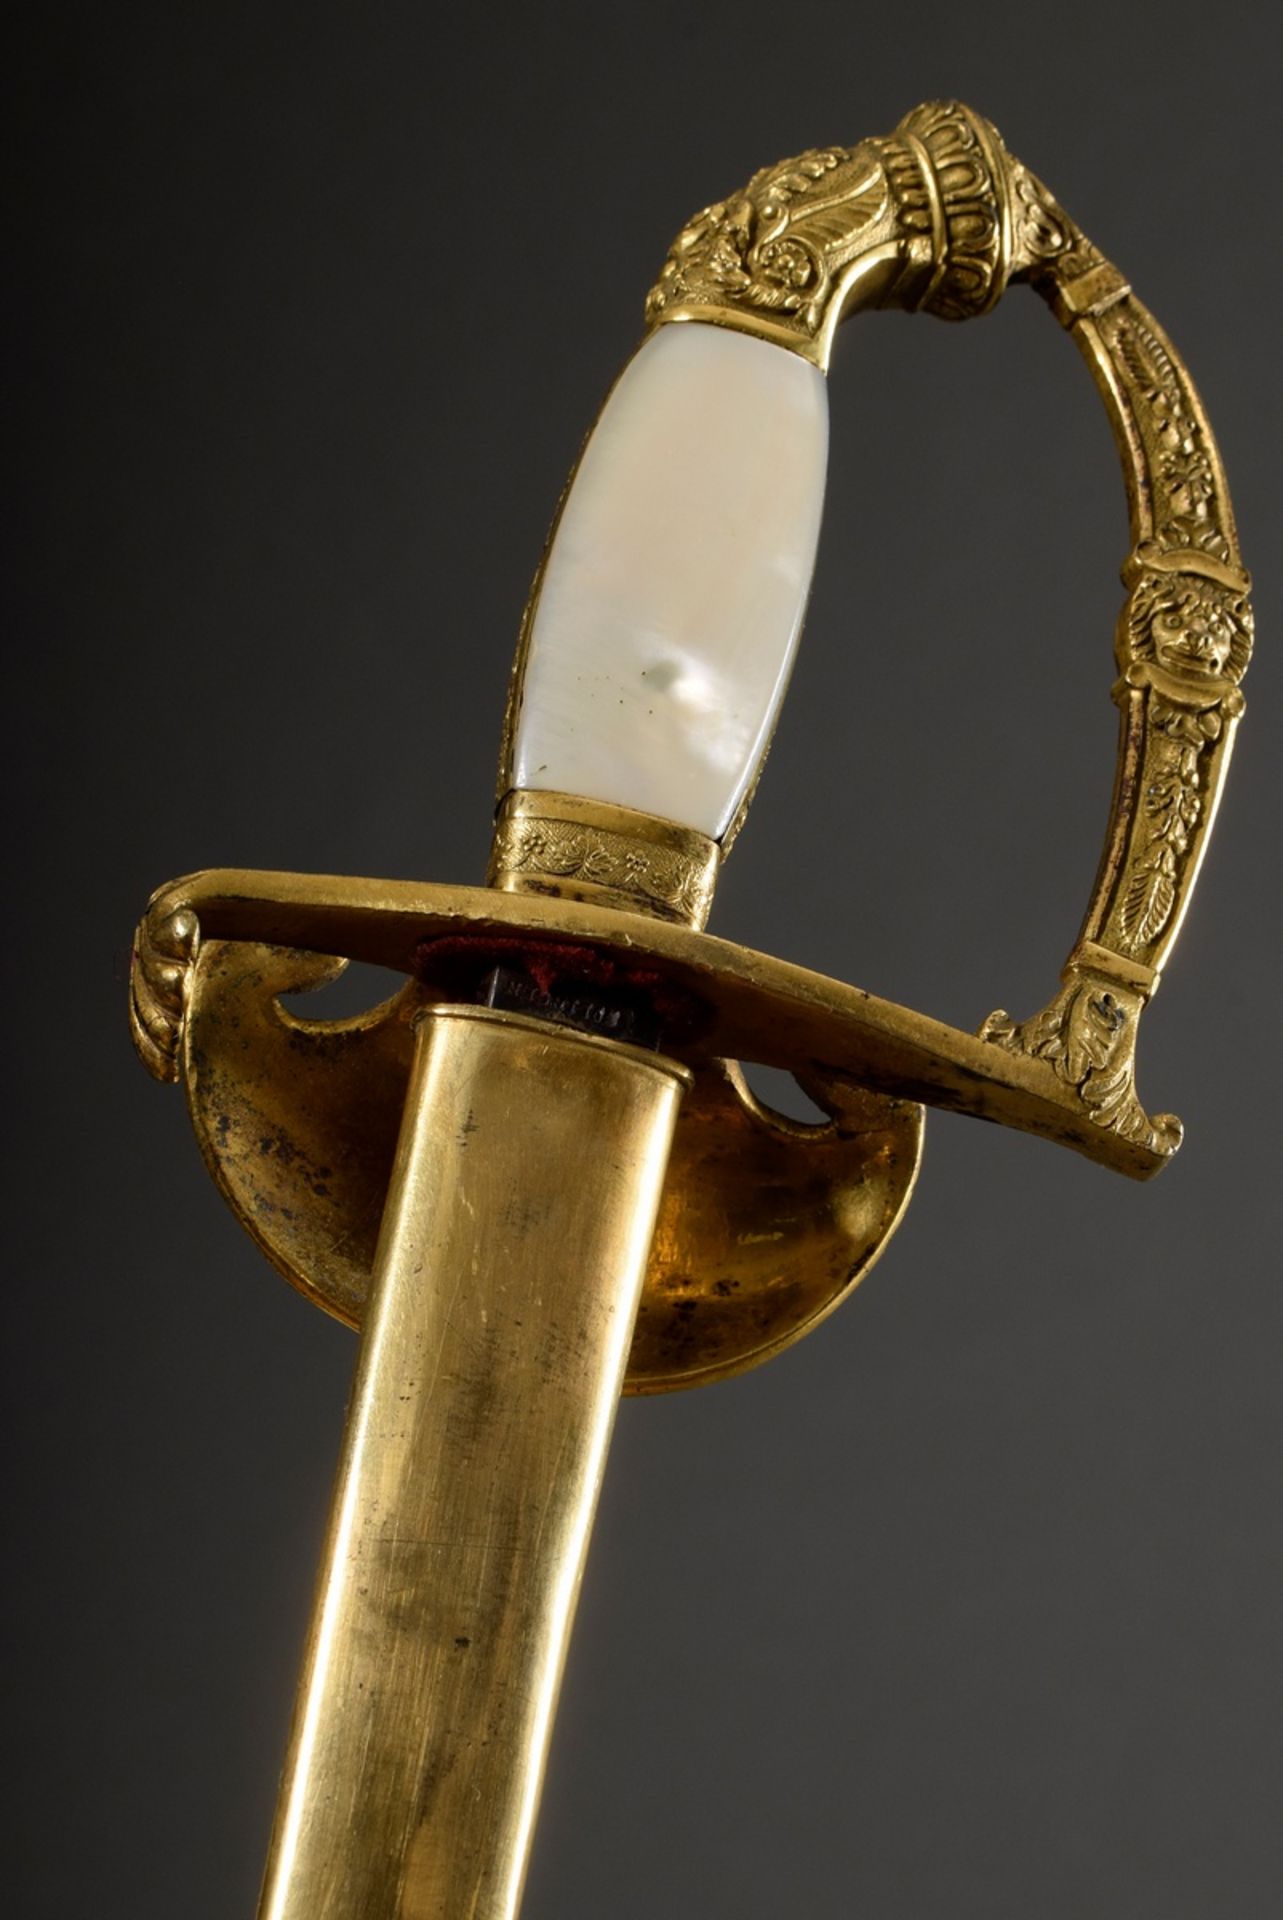 Bavarian civil servant's sword from the reign of King Ludwig I (1825-1848) or King Ludwig II (1864- - Image 9 of 11